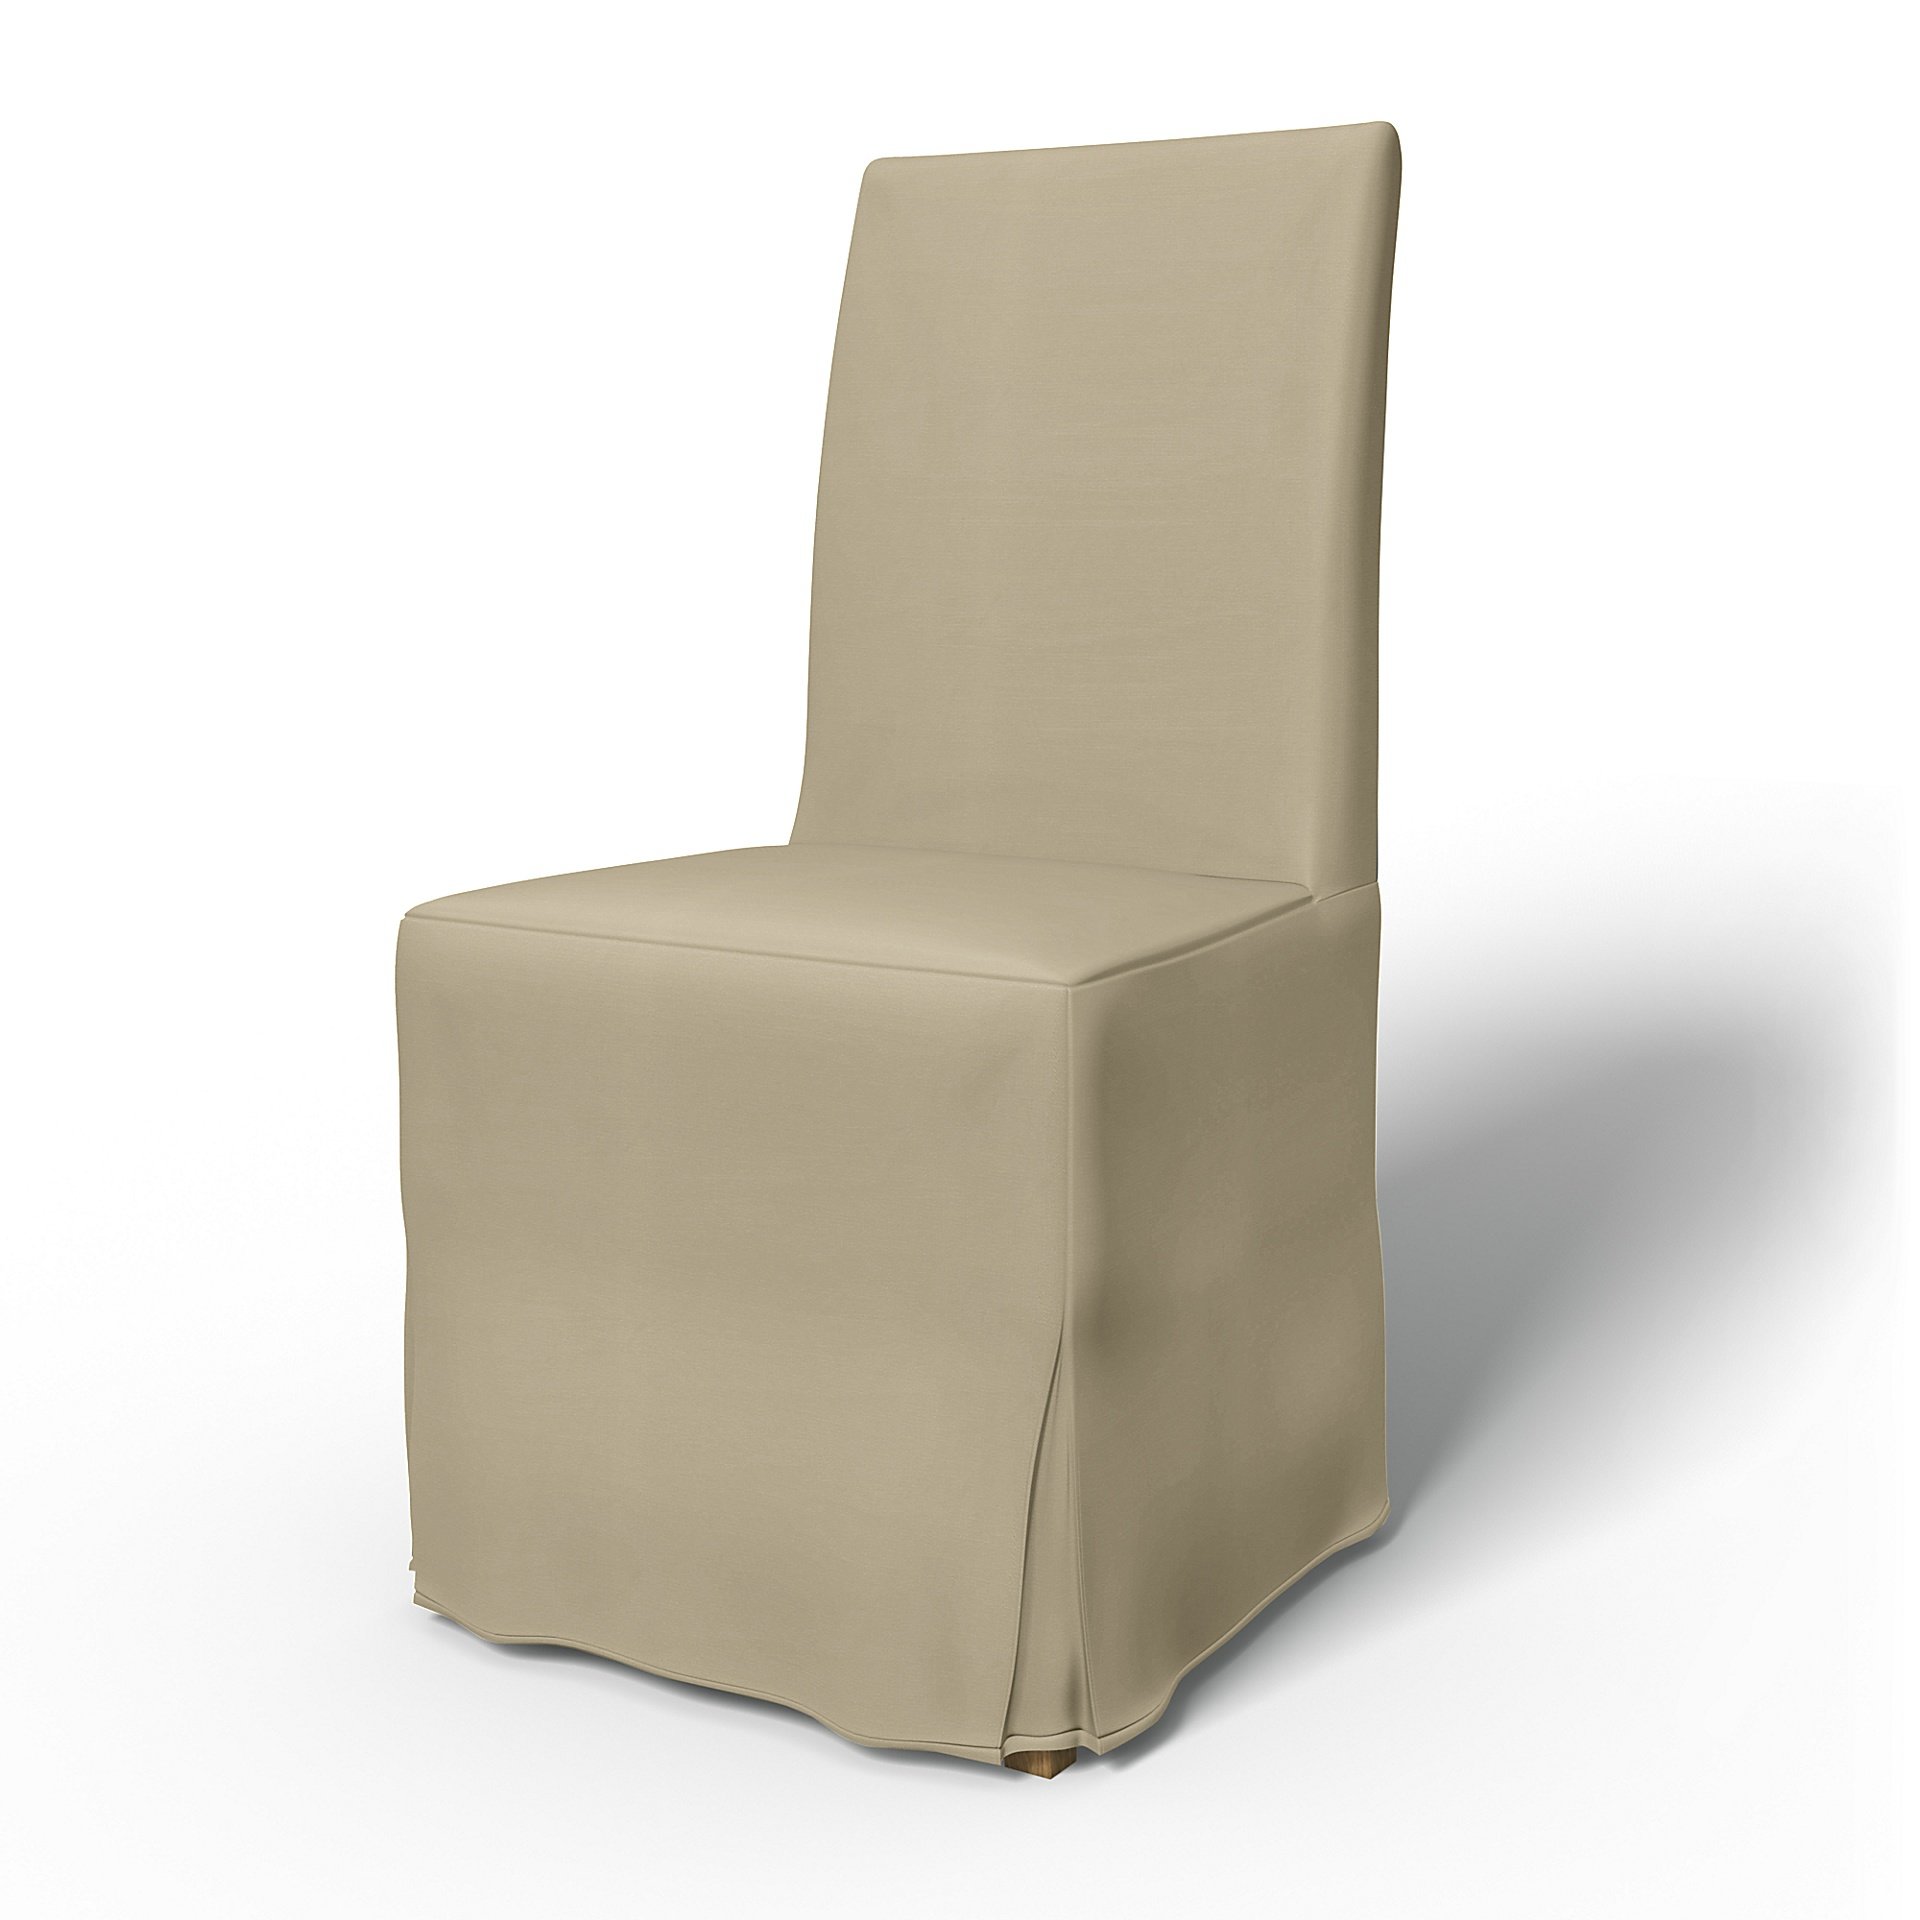 IKEA - Henriksdal Dining Chair Cover Long Skirt with Box Pleat (Standard model), Sand Beige, Cotton 